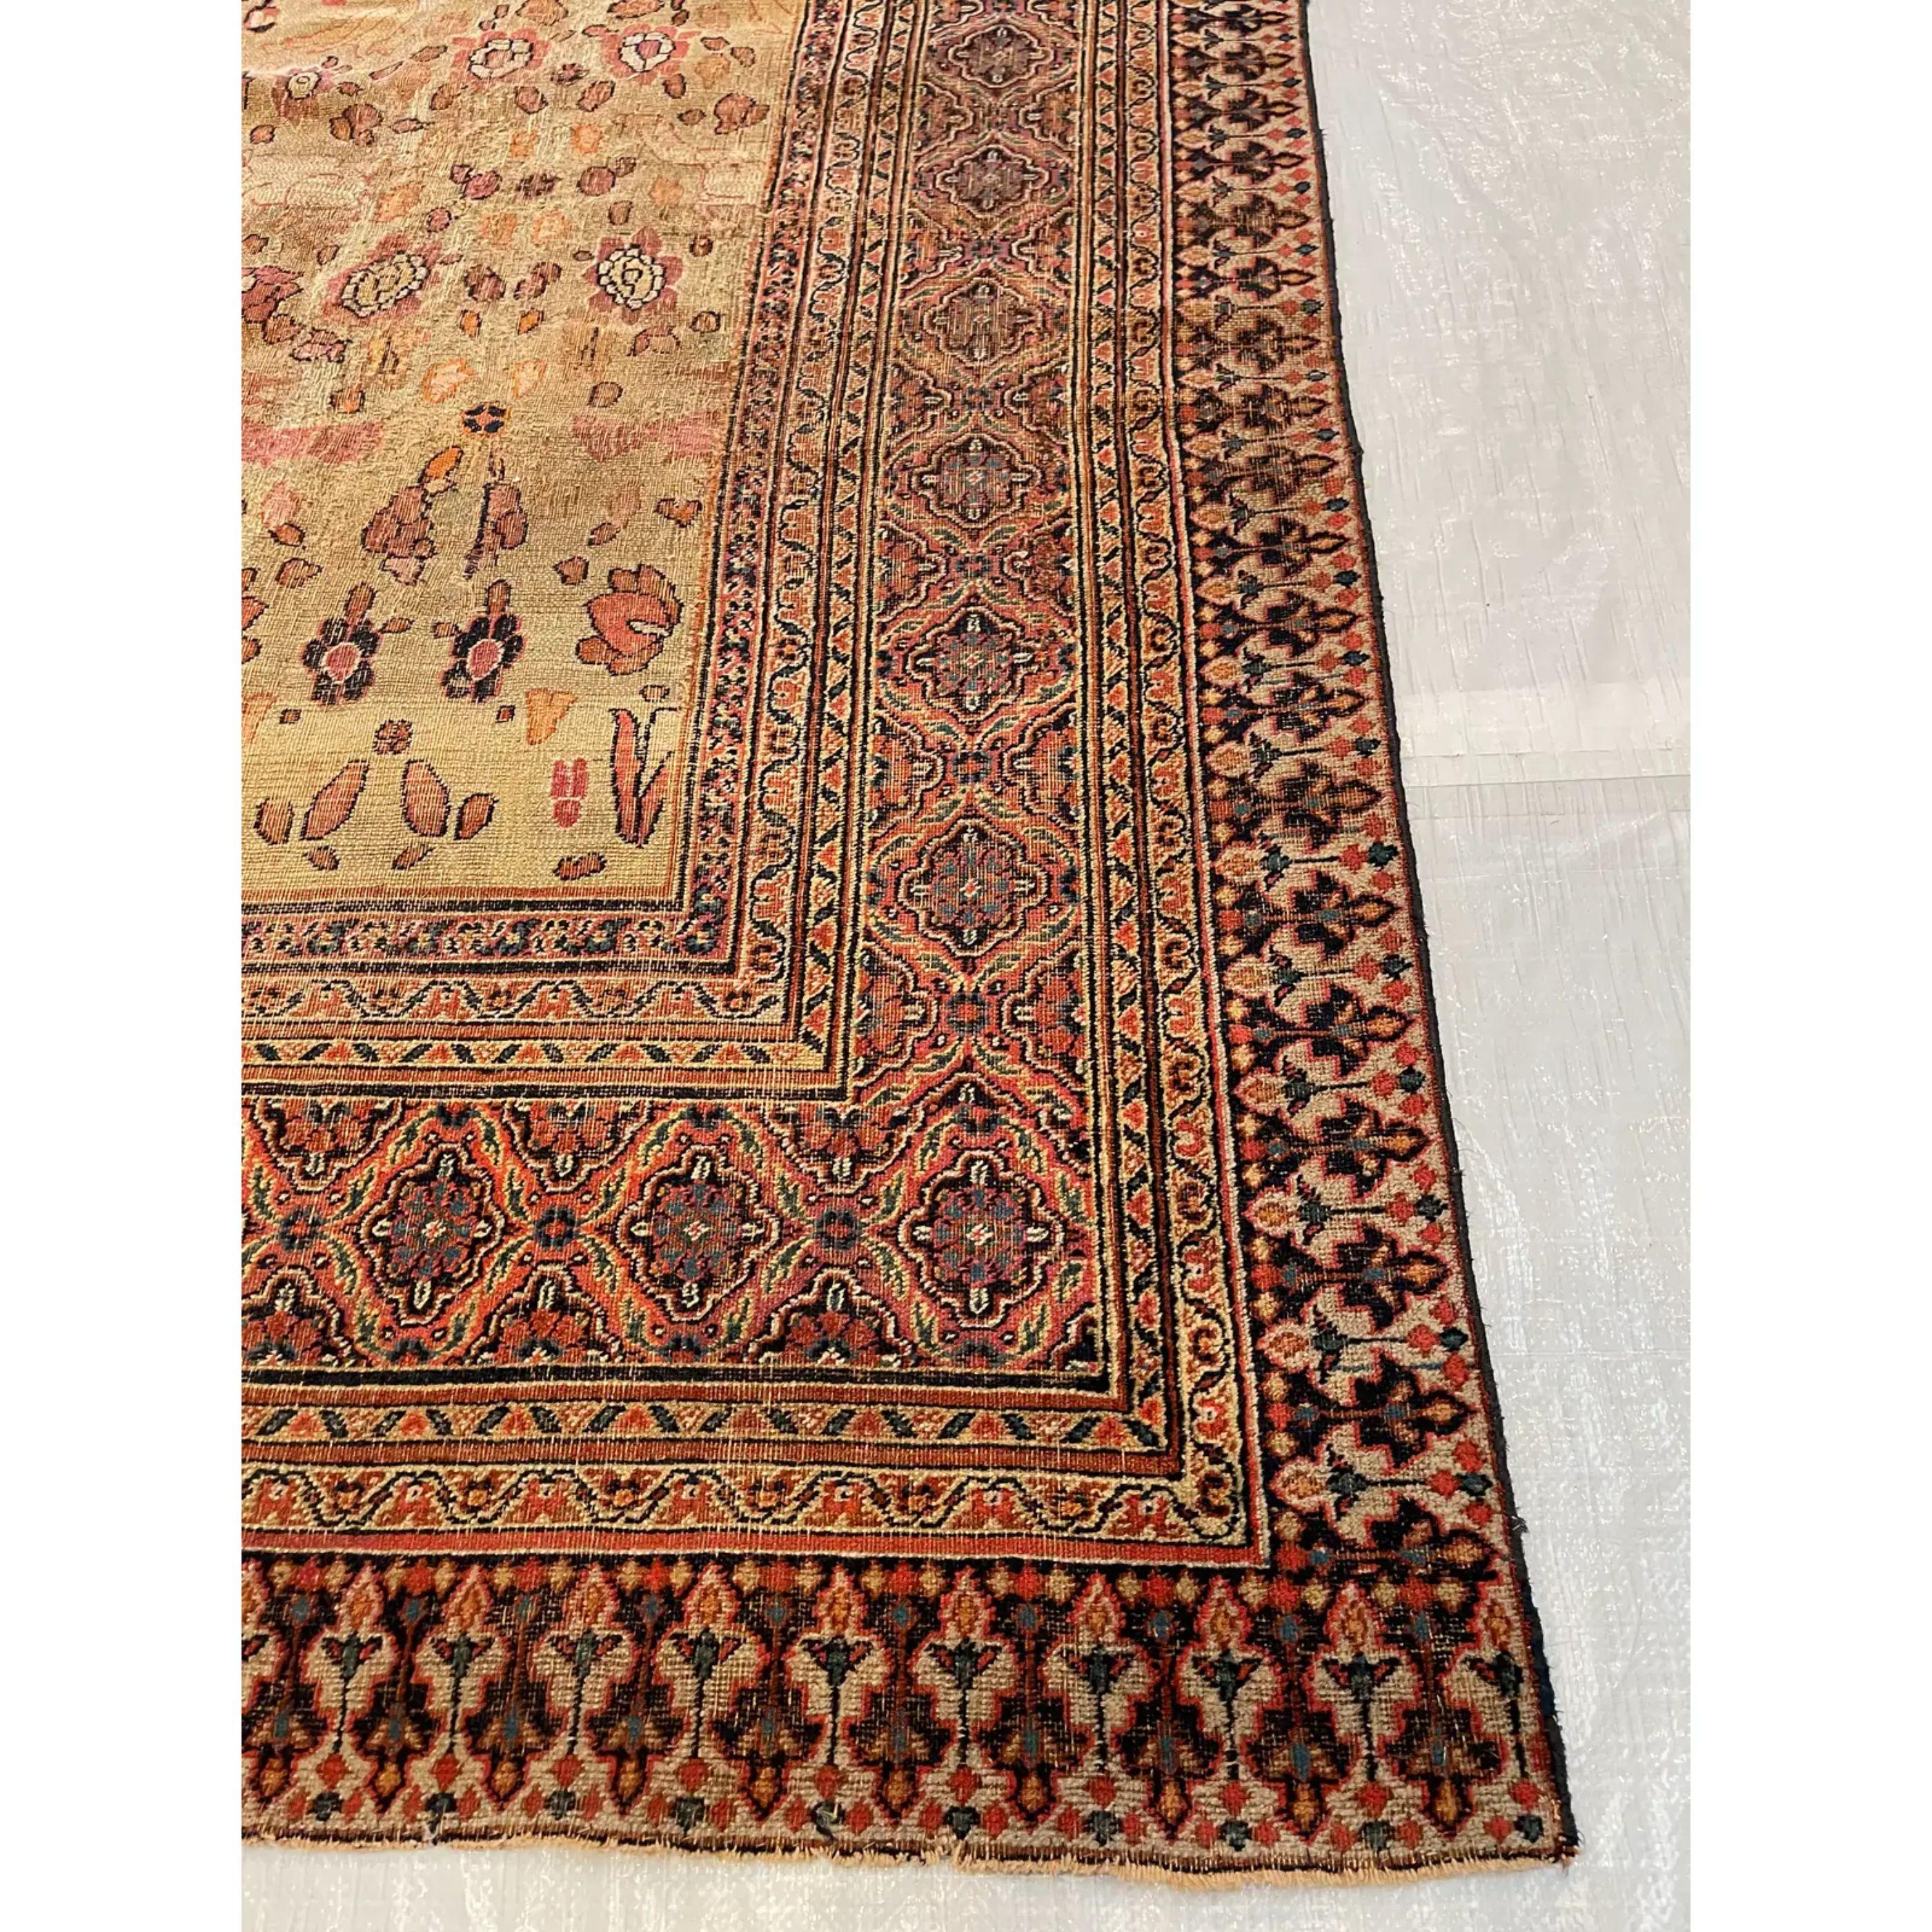 Early 20th Century Antique Persian Dorokhsh Rug - 8′10″ × 11′7″ For Sale